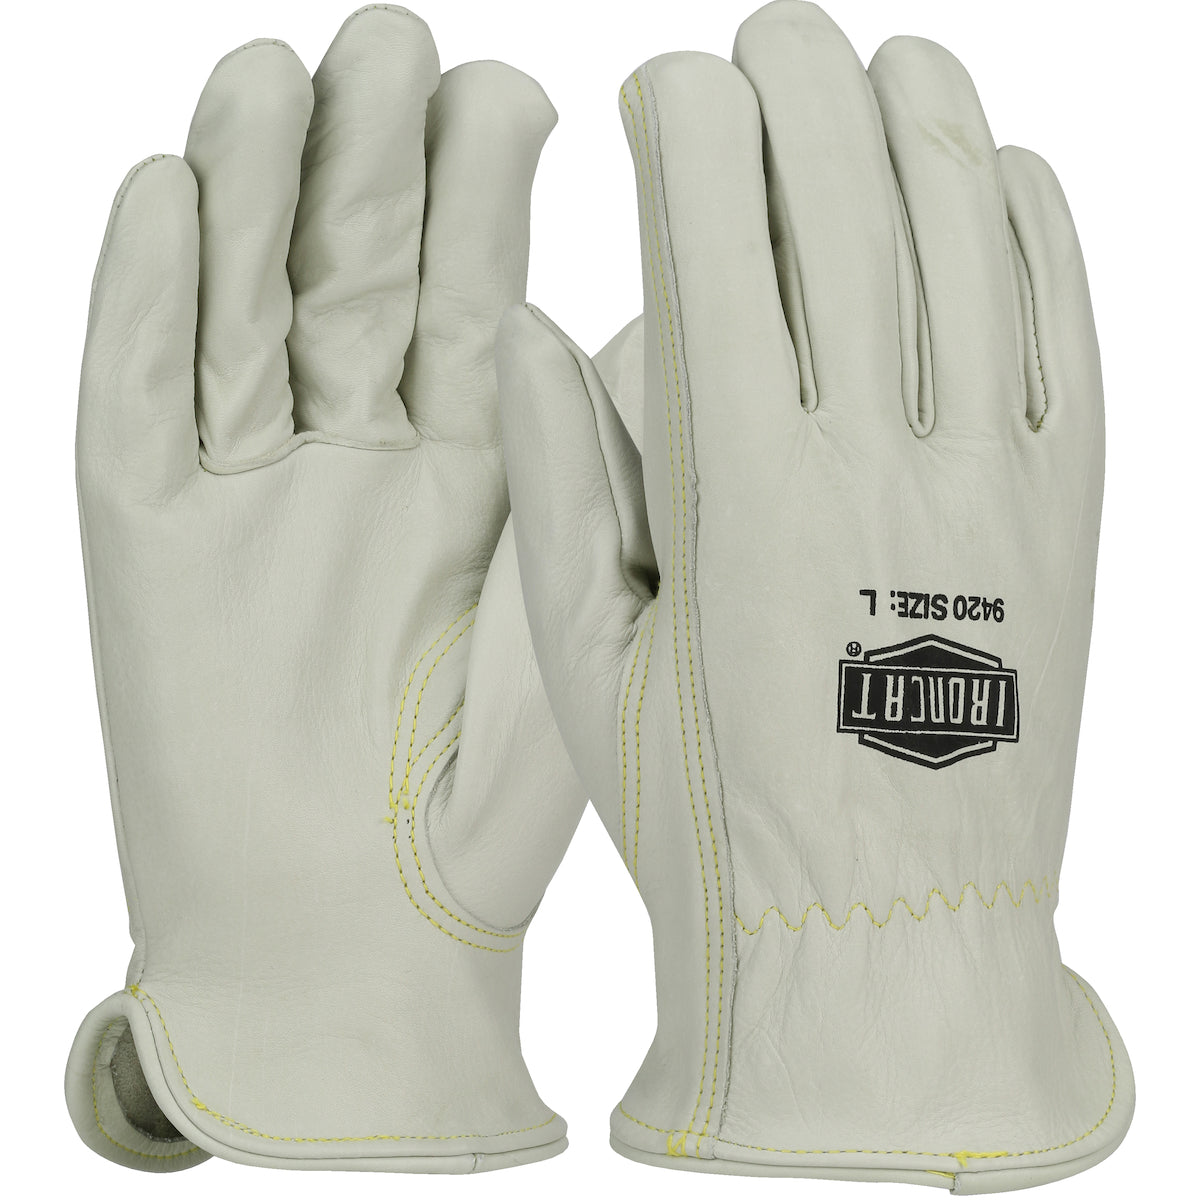 West Chester 9420/M Premium Grade Top Grain Cowhide Leather Drivers Glove - Keystone Thumb